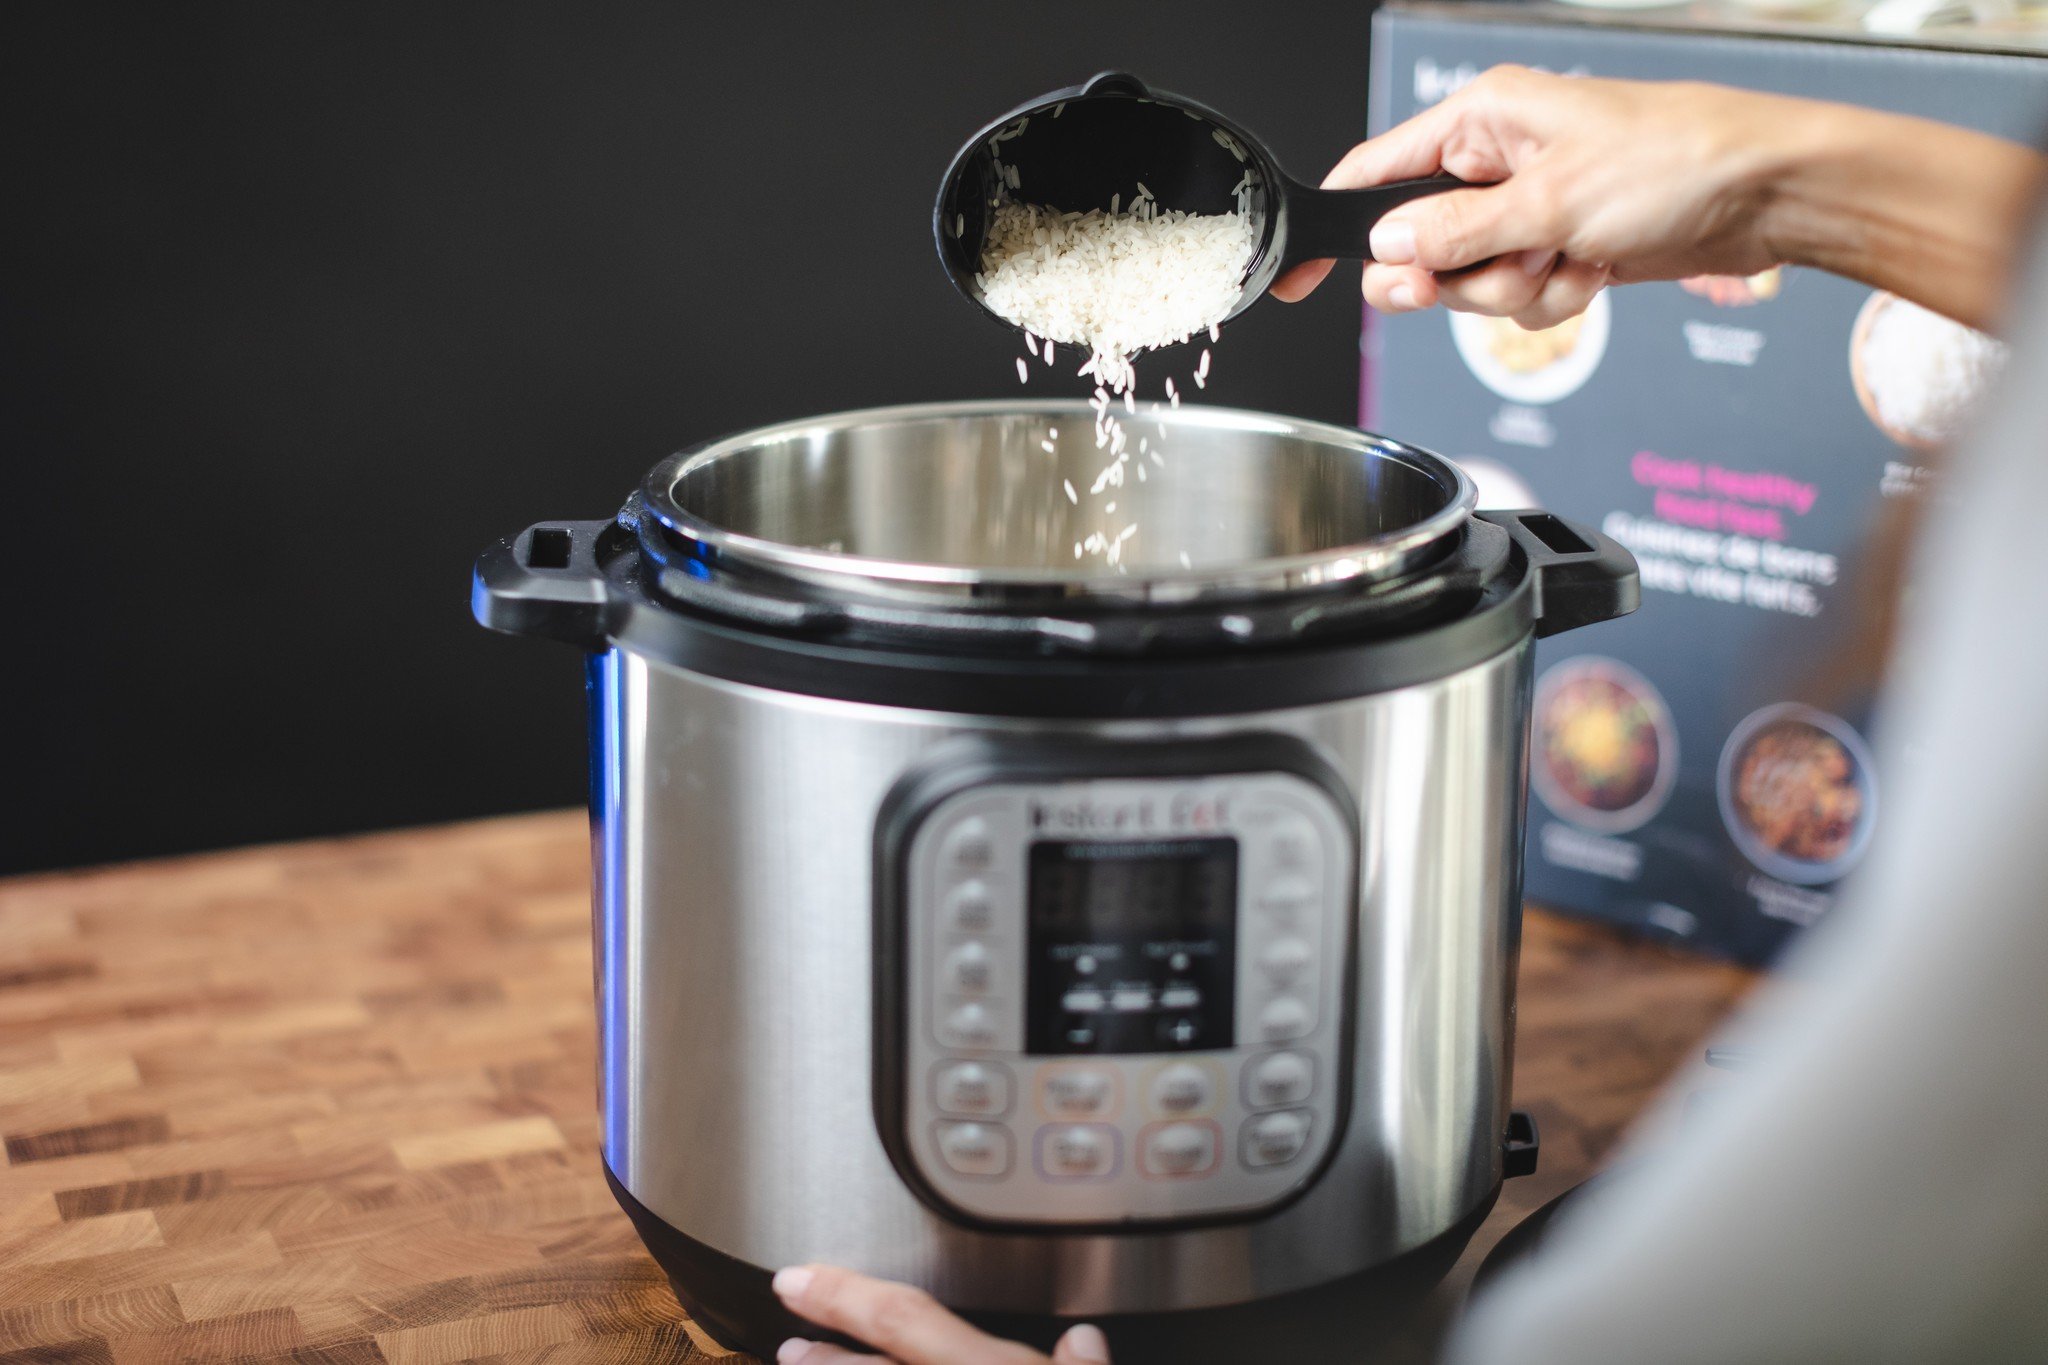 Pouring rice into Instant Pot DUO60